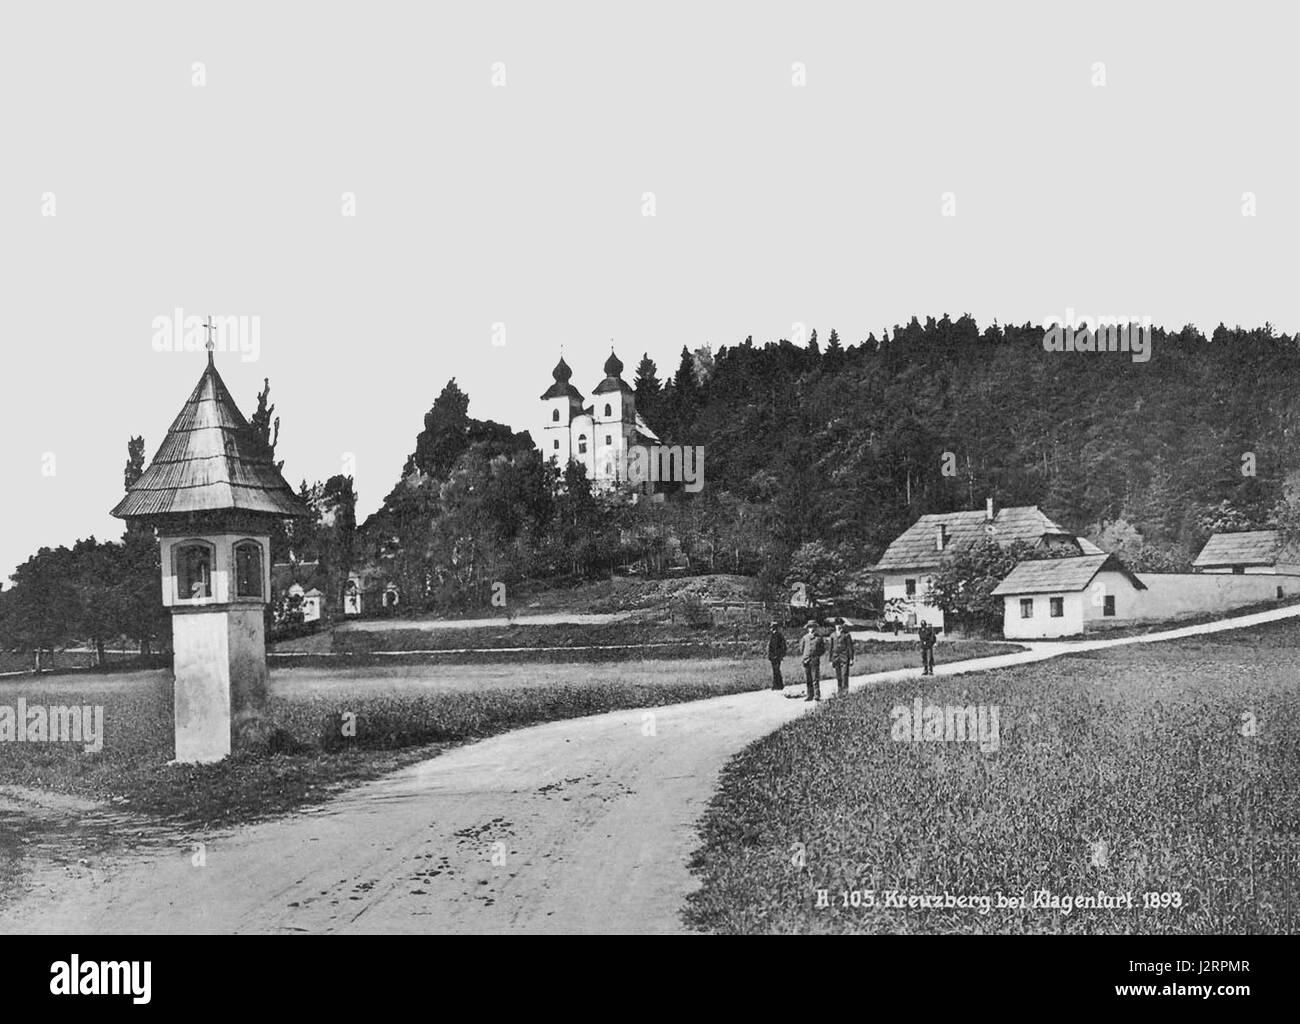 Historical photograph of the Kreuzbergl, showing a wayside shrine in the foreground, the Kreuzbergl church in the background and the restaurant 'Einsiedler' on the right side, situated in the 8th district 'Villacher Vorstadt' of the capital Klagenfurt, Carinthia, Austria Stock Photo